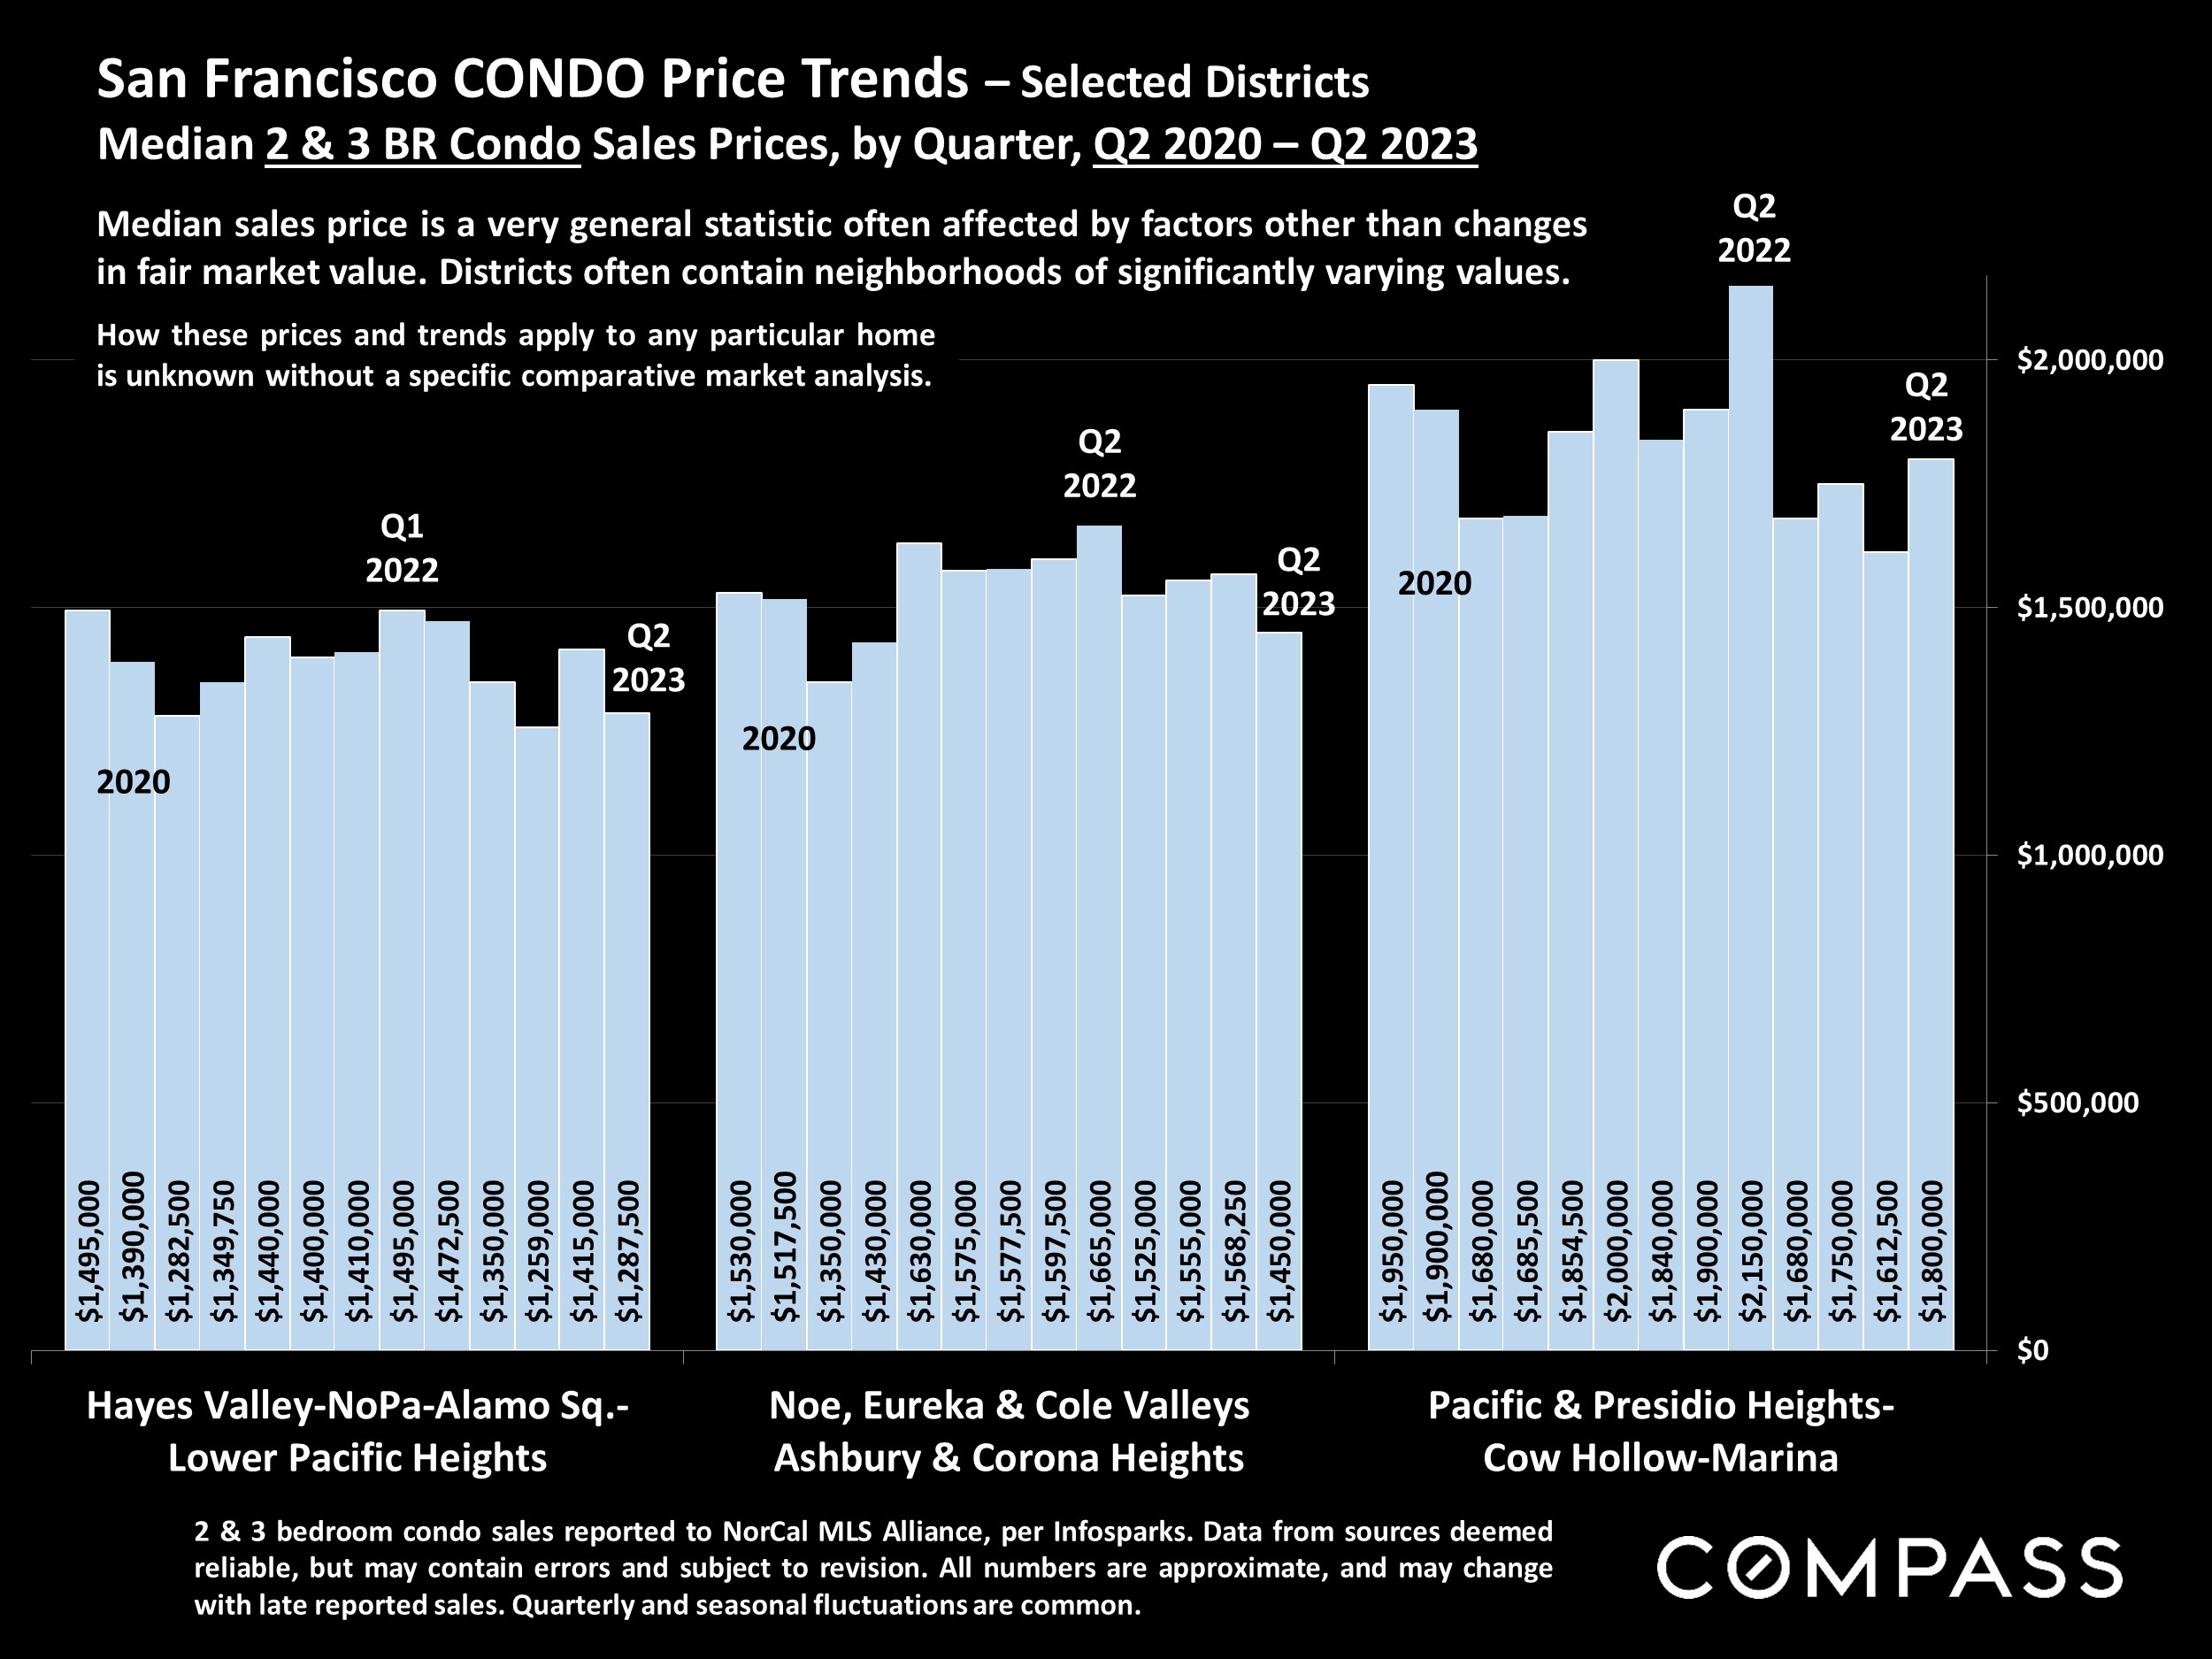 San Francisco CONDO Price Trends - Selected Districts